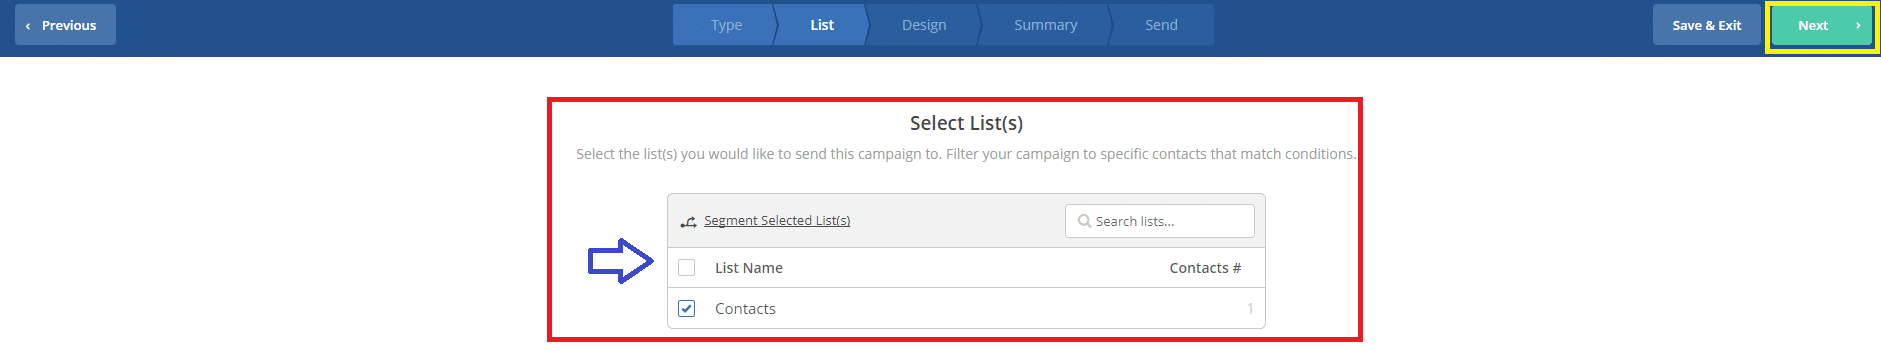 Select List Function